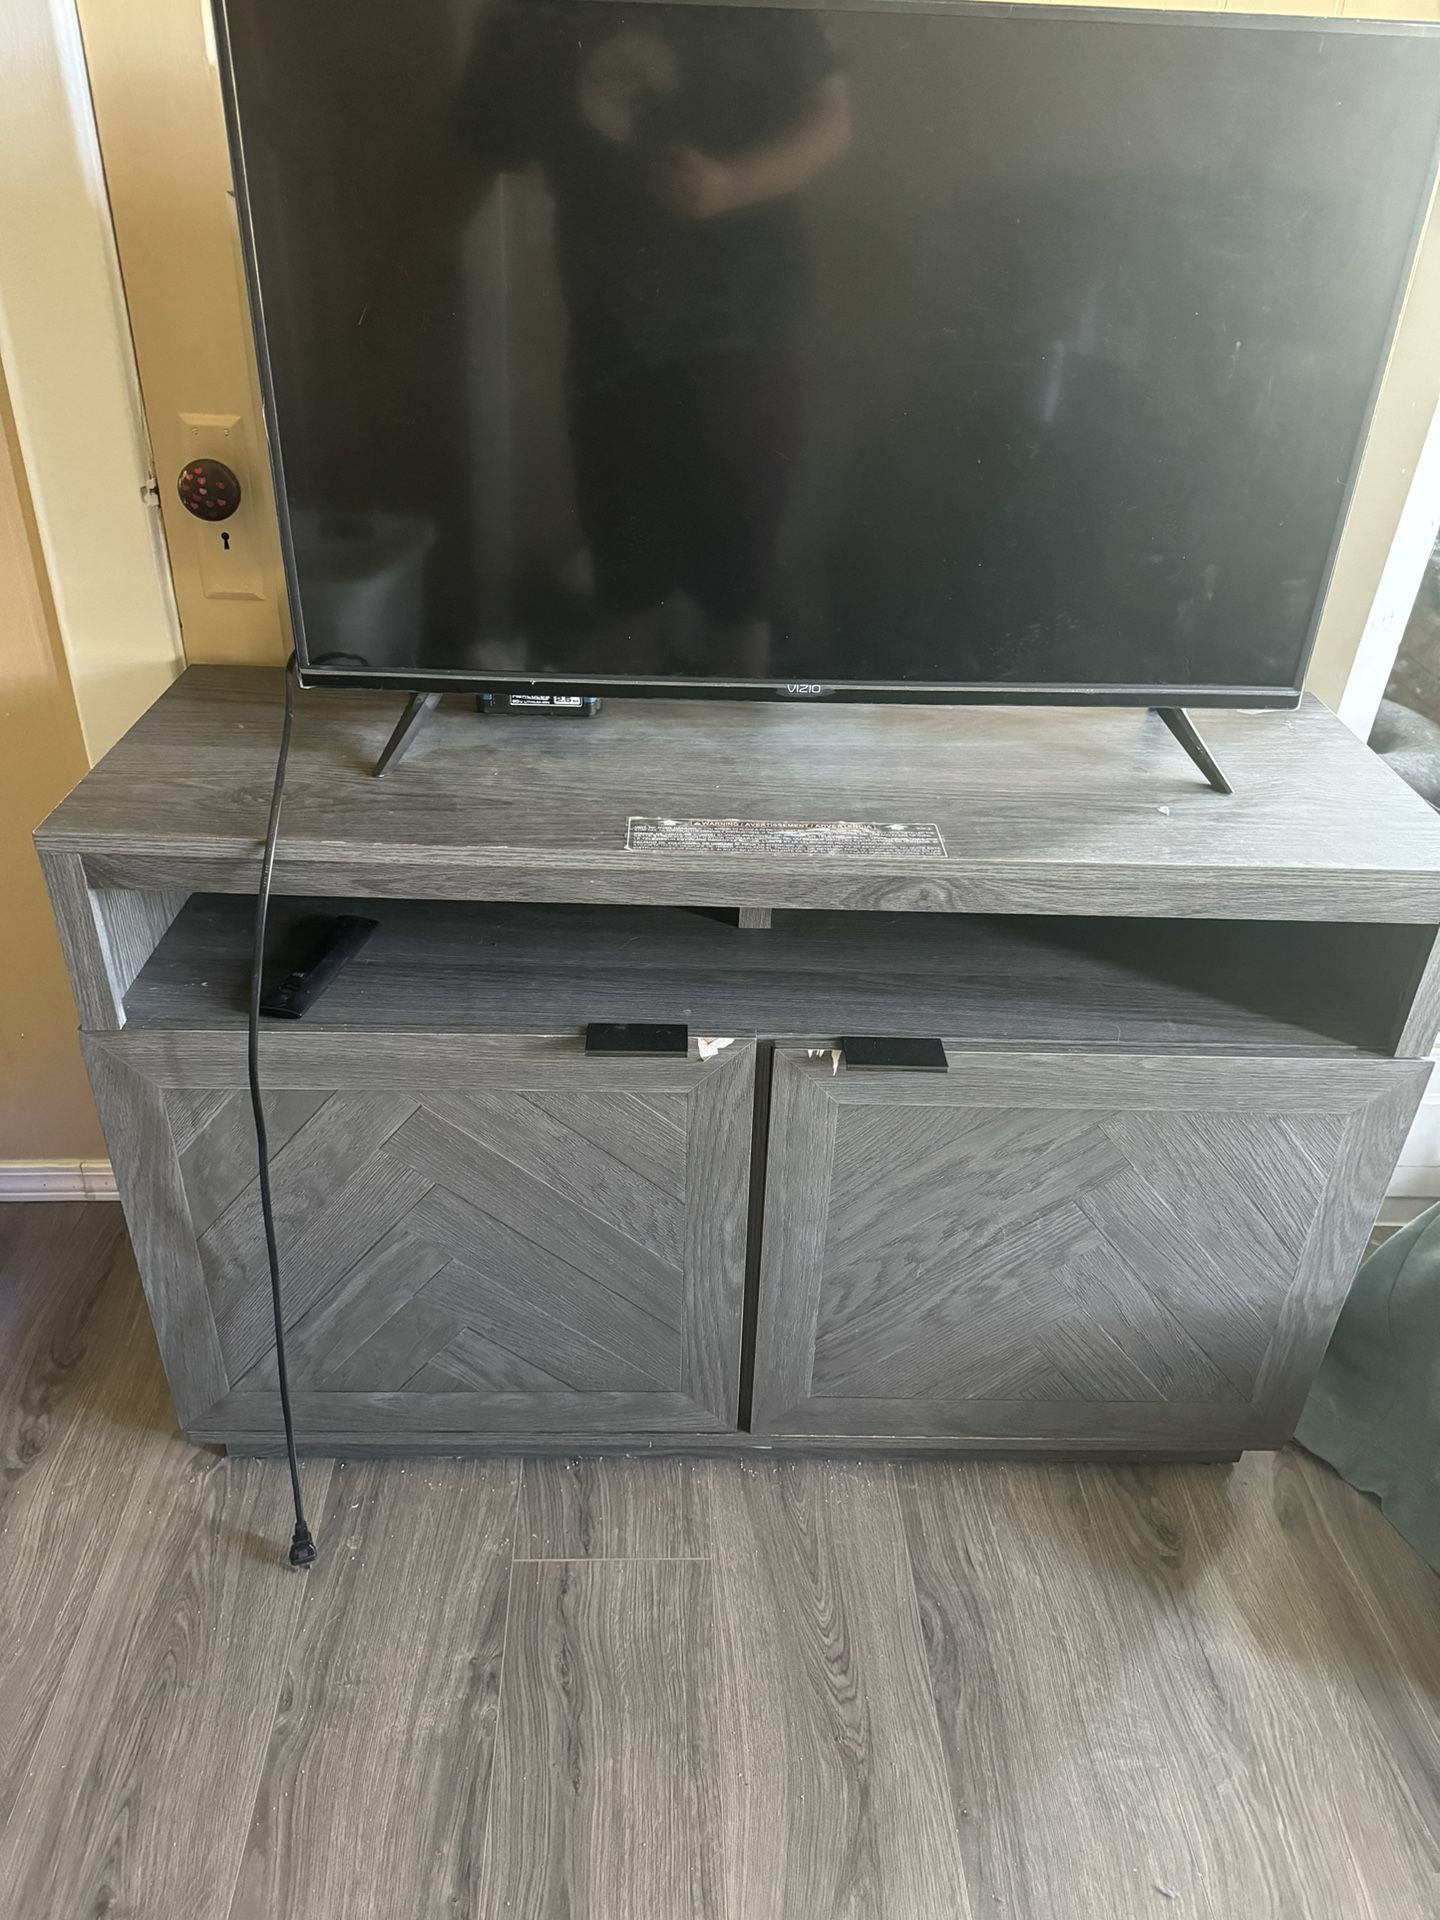 42 Inch 4k TV With Stand